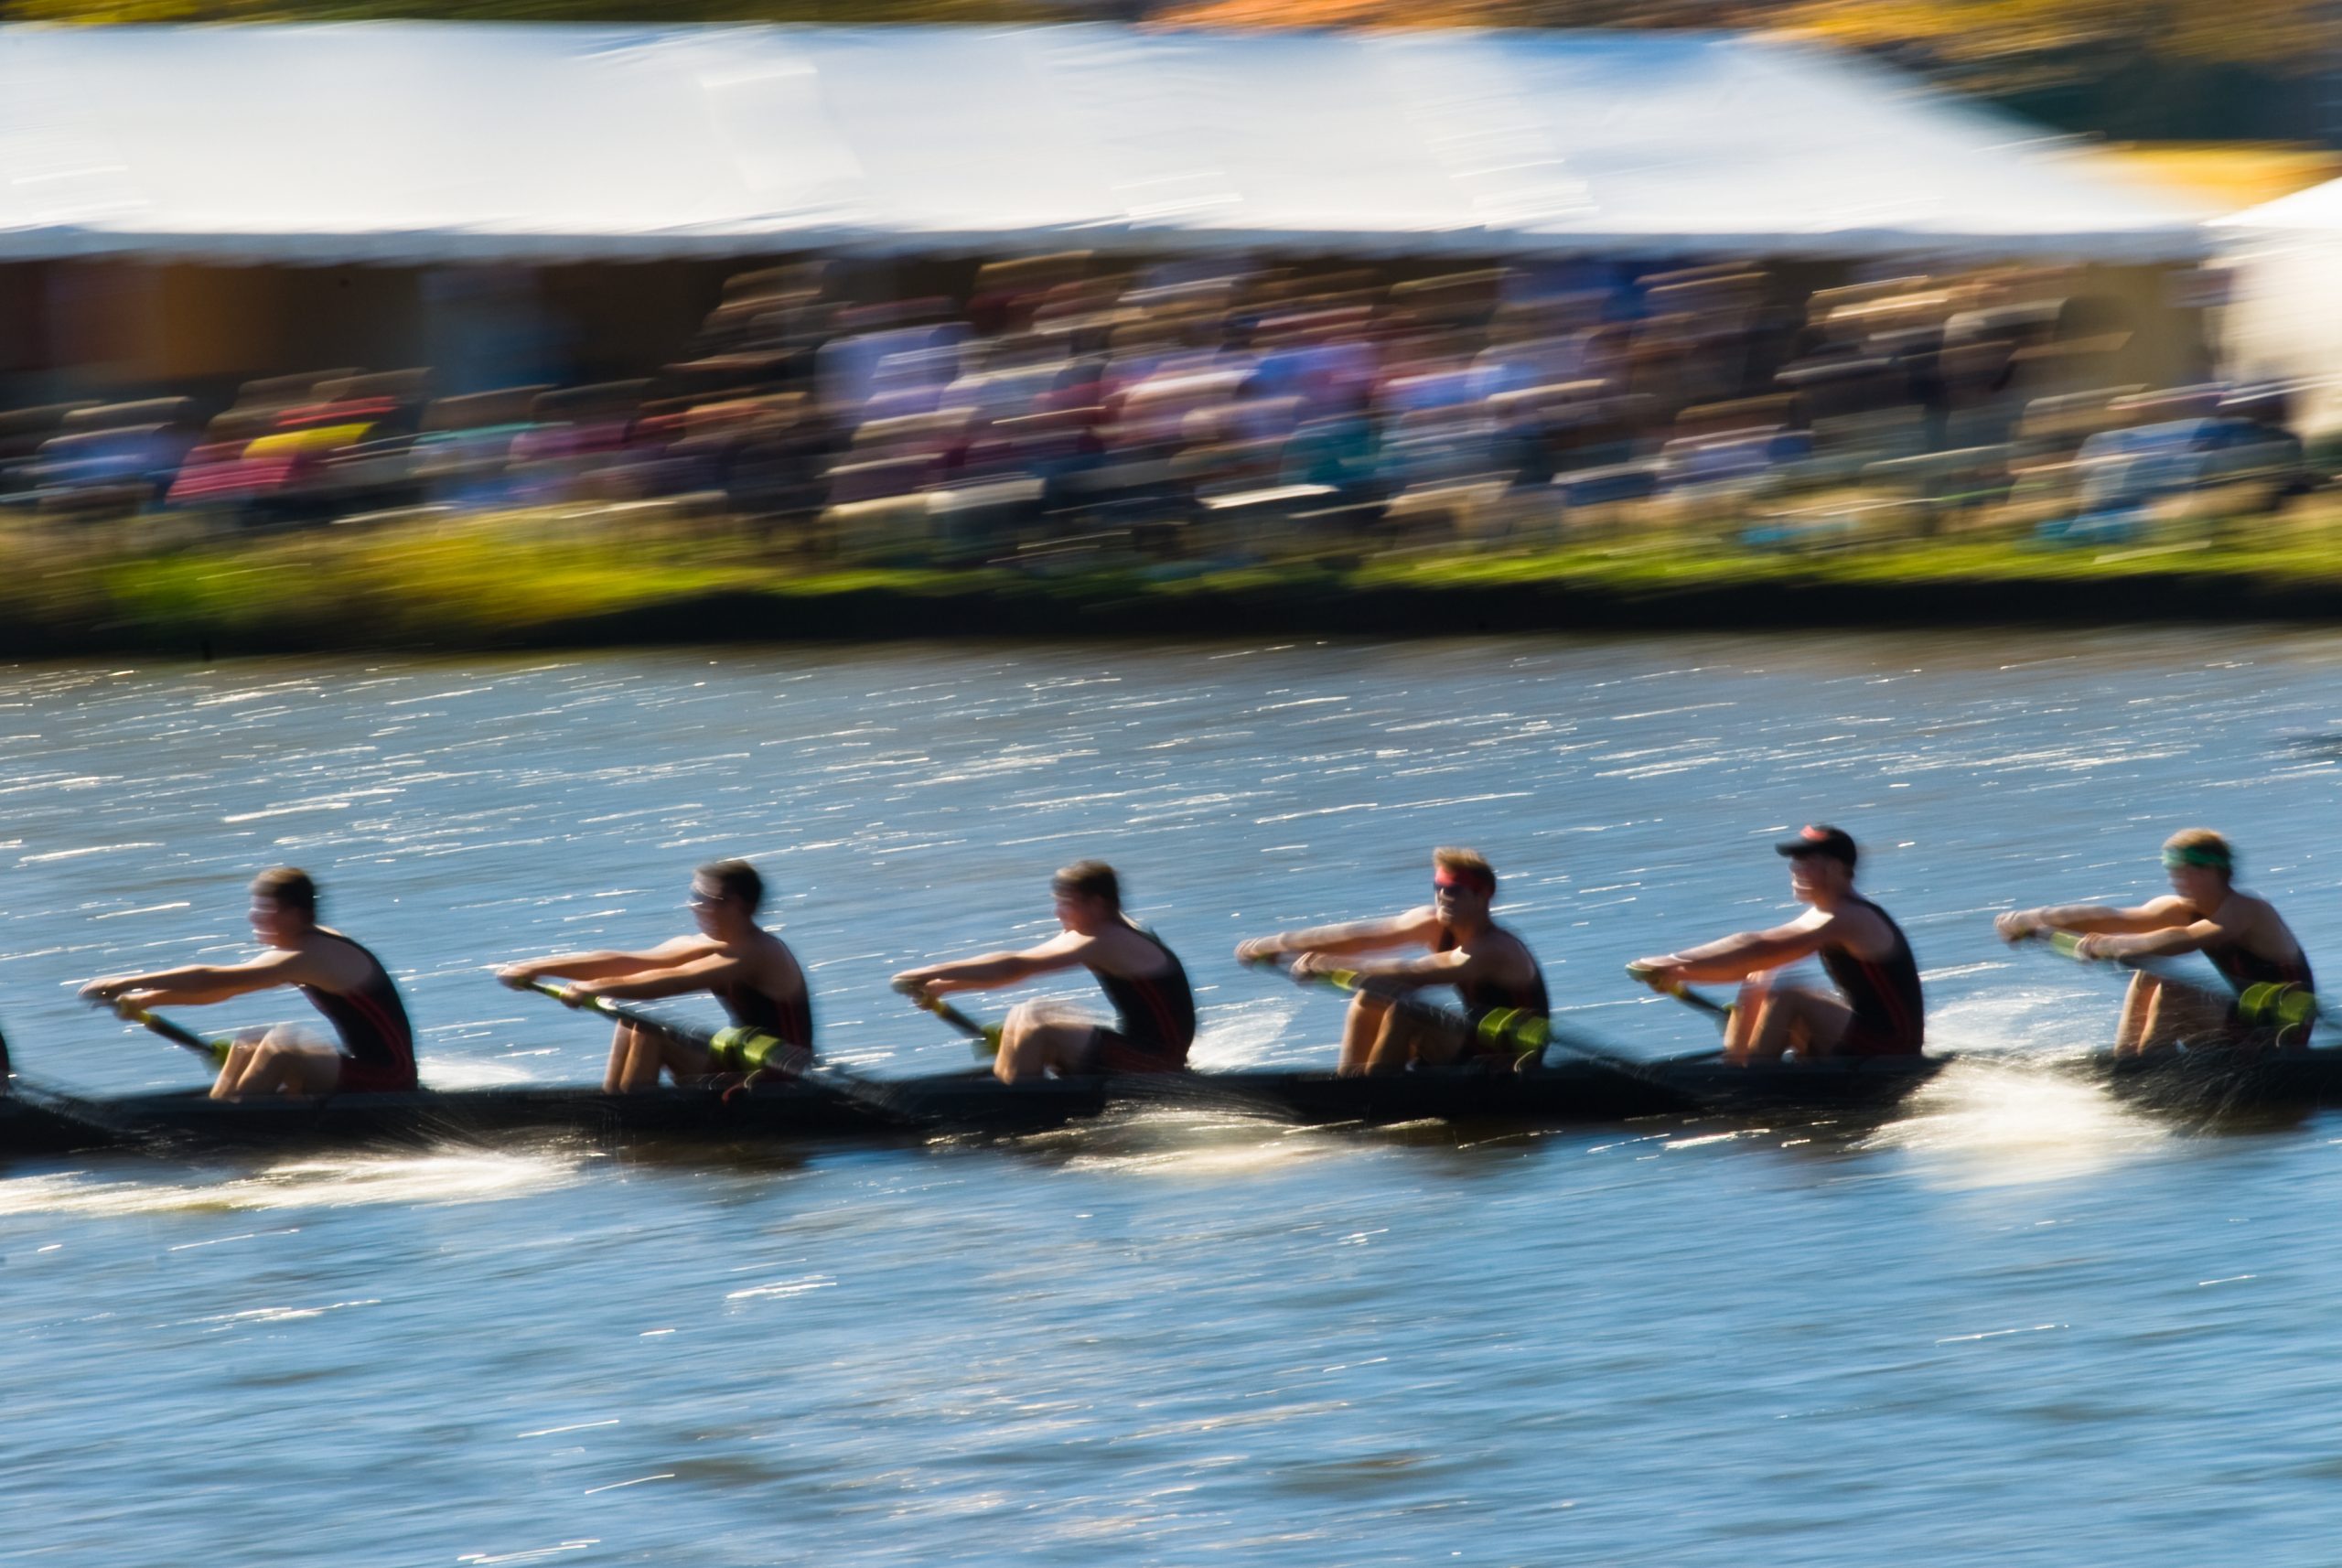 Male rowing team all pulling together